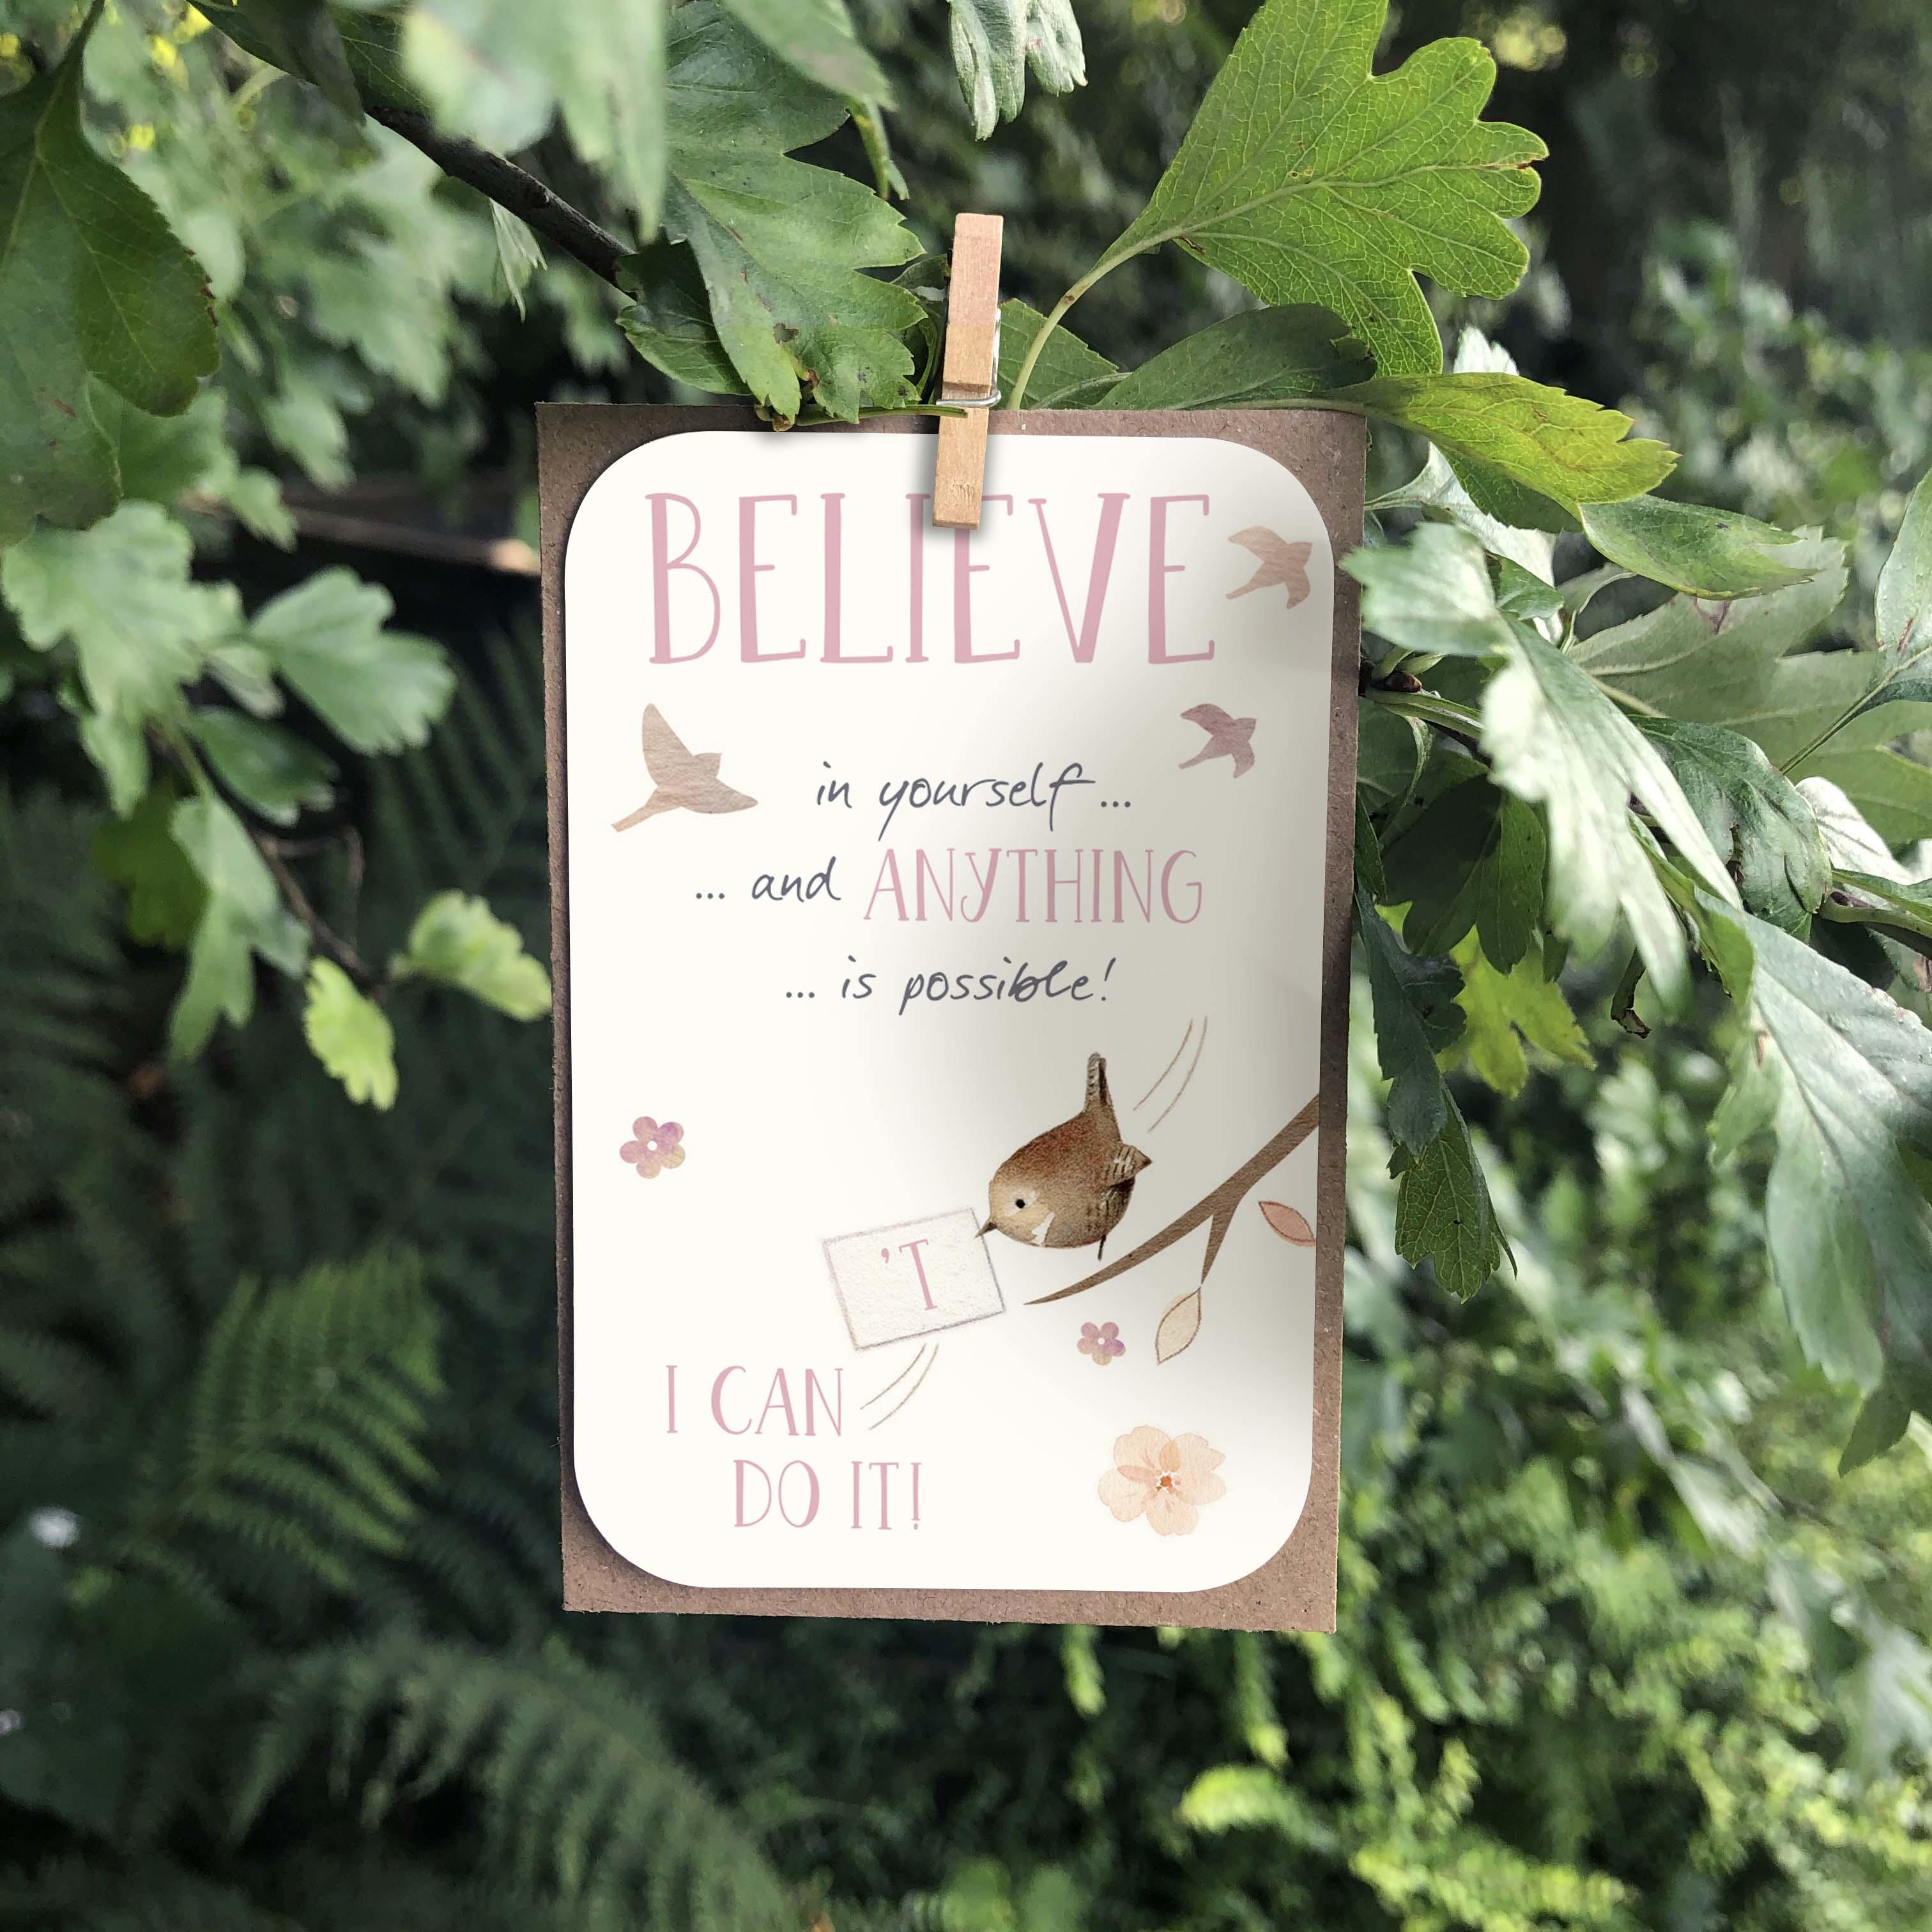 A small keepsake card with a “Believe in yourself” positive caption. Features an illustrated cute wren and “I Can do it! message.